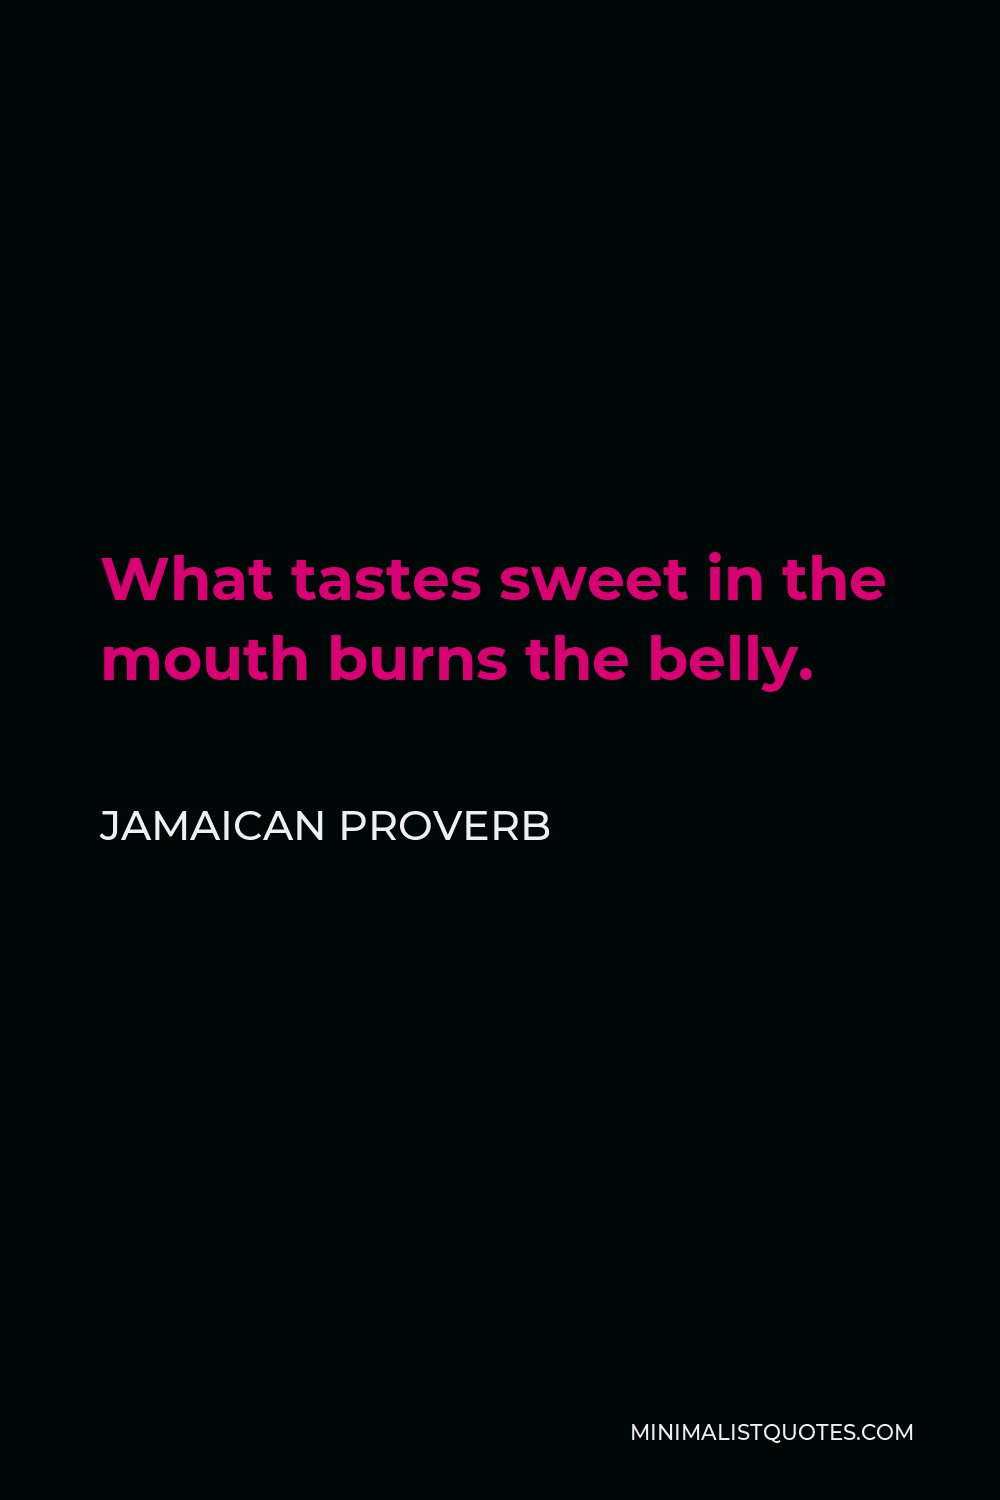 Jamaican Proverb Quote - What tastes sweet in the mouth burns the belly.